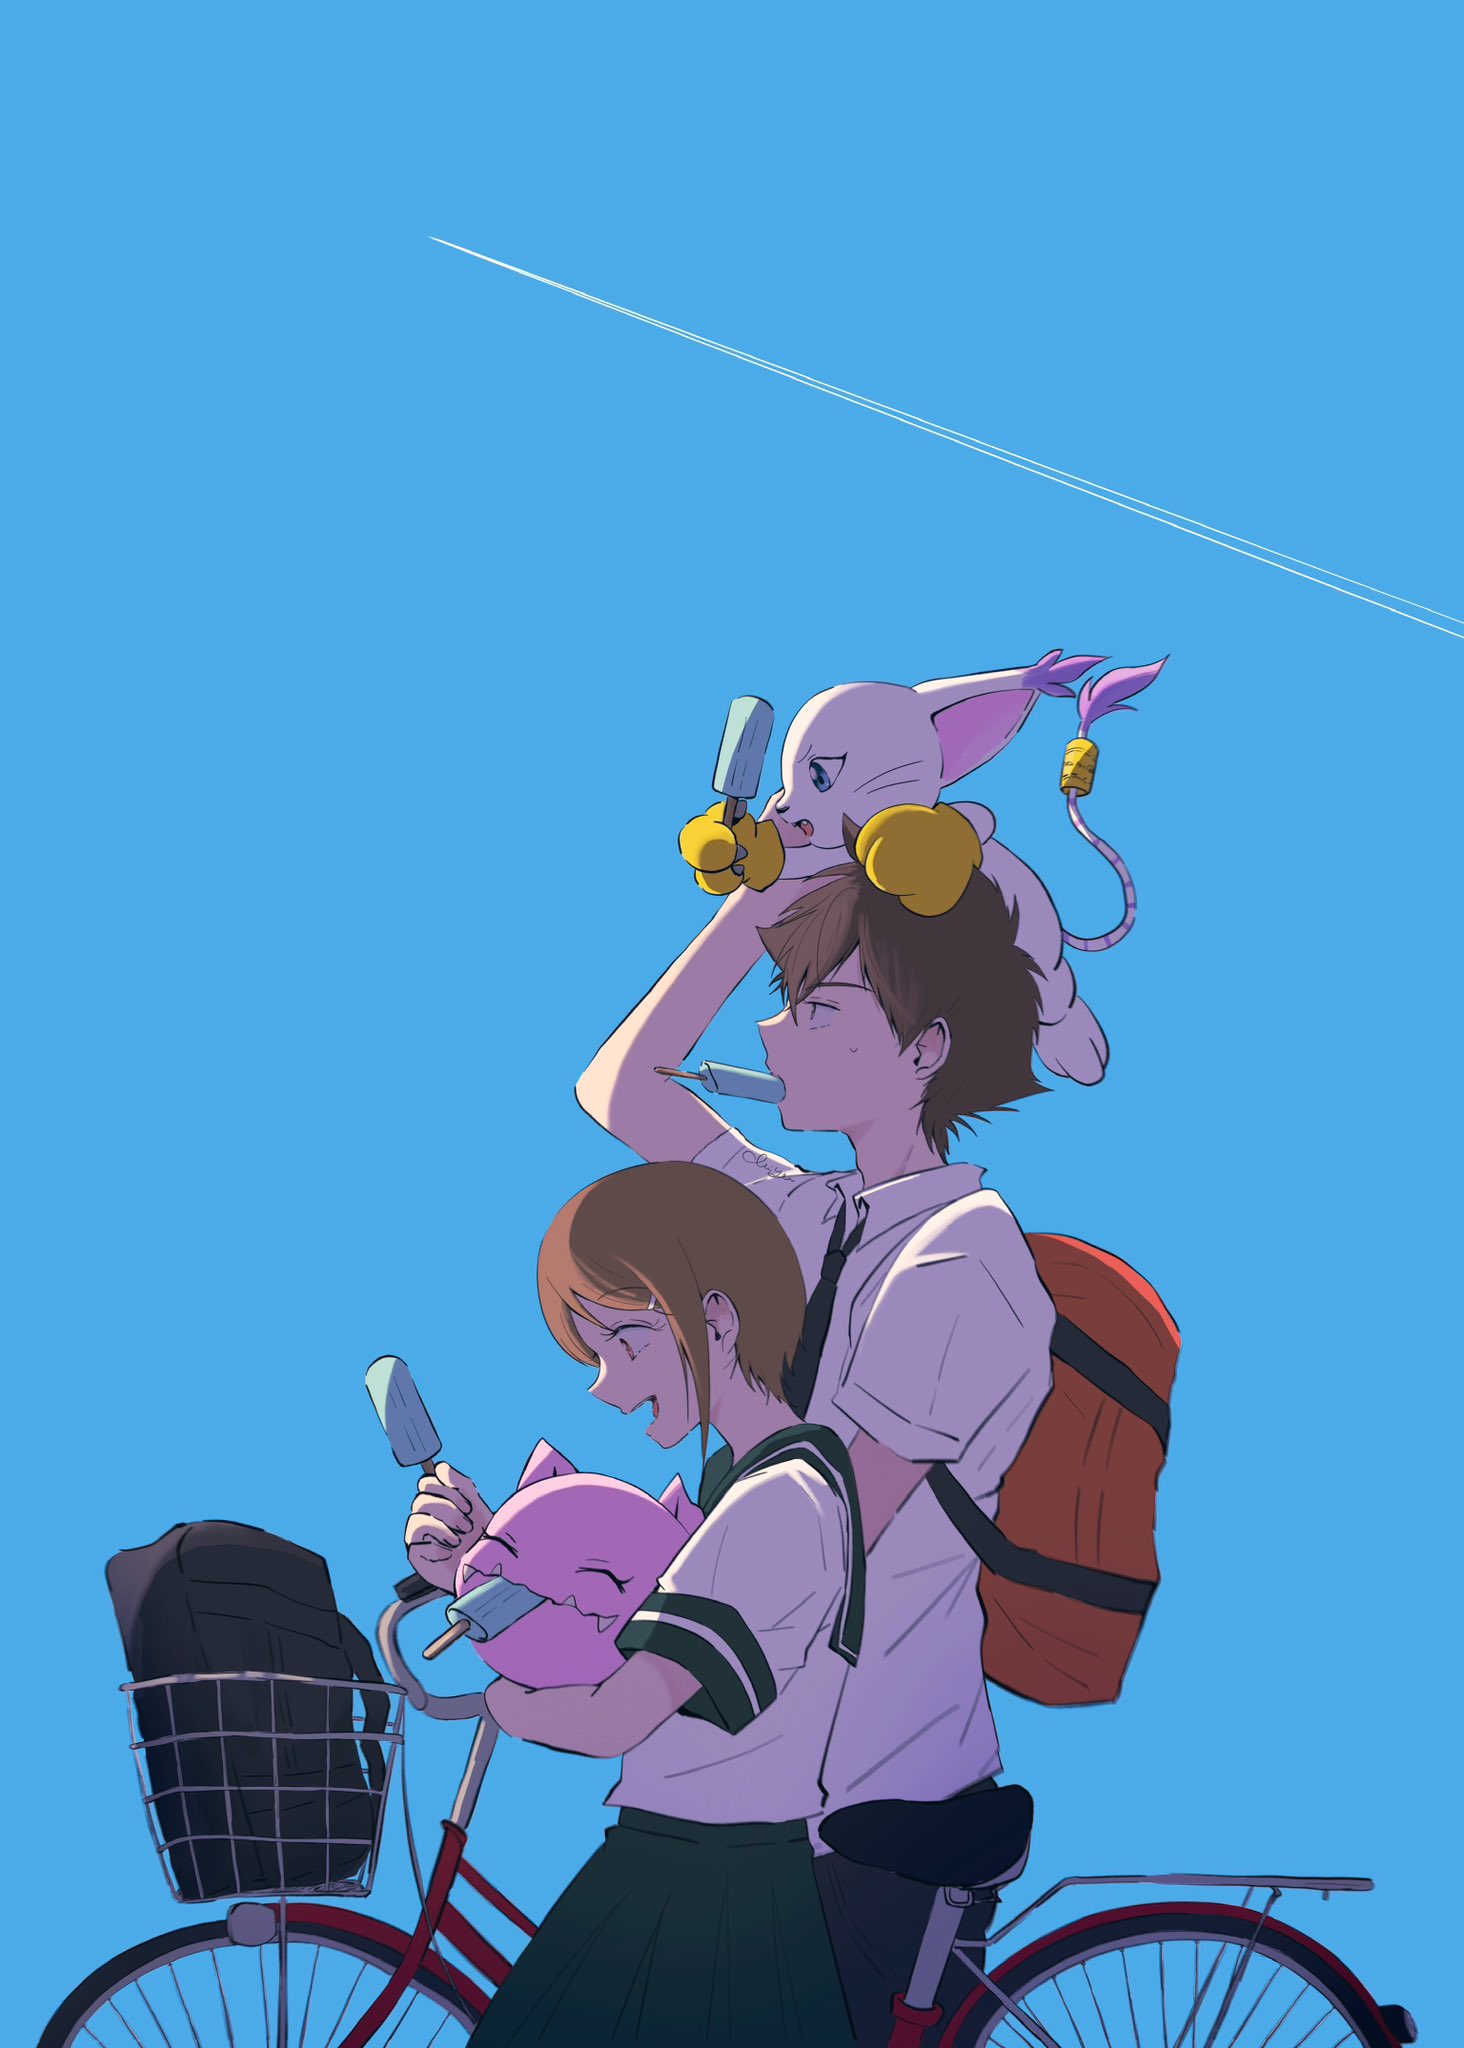 1boy 1girl backpack bag bicycle brother_and_sister brown_hair cat chiyu_(user_hrwu2257) digimon digimon_(creature) digimon_adventure_tri. food food_in_mouth highres holy_ring koromon popsicle popsicle_in_mouth short_hair siblings smile tail tailmon yagami_hikari yagami_taichi